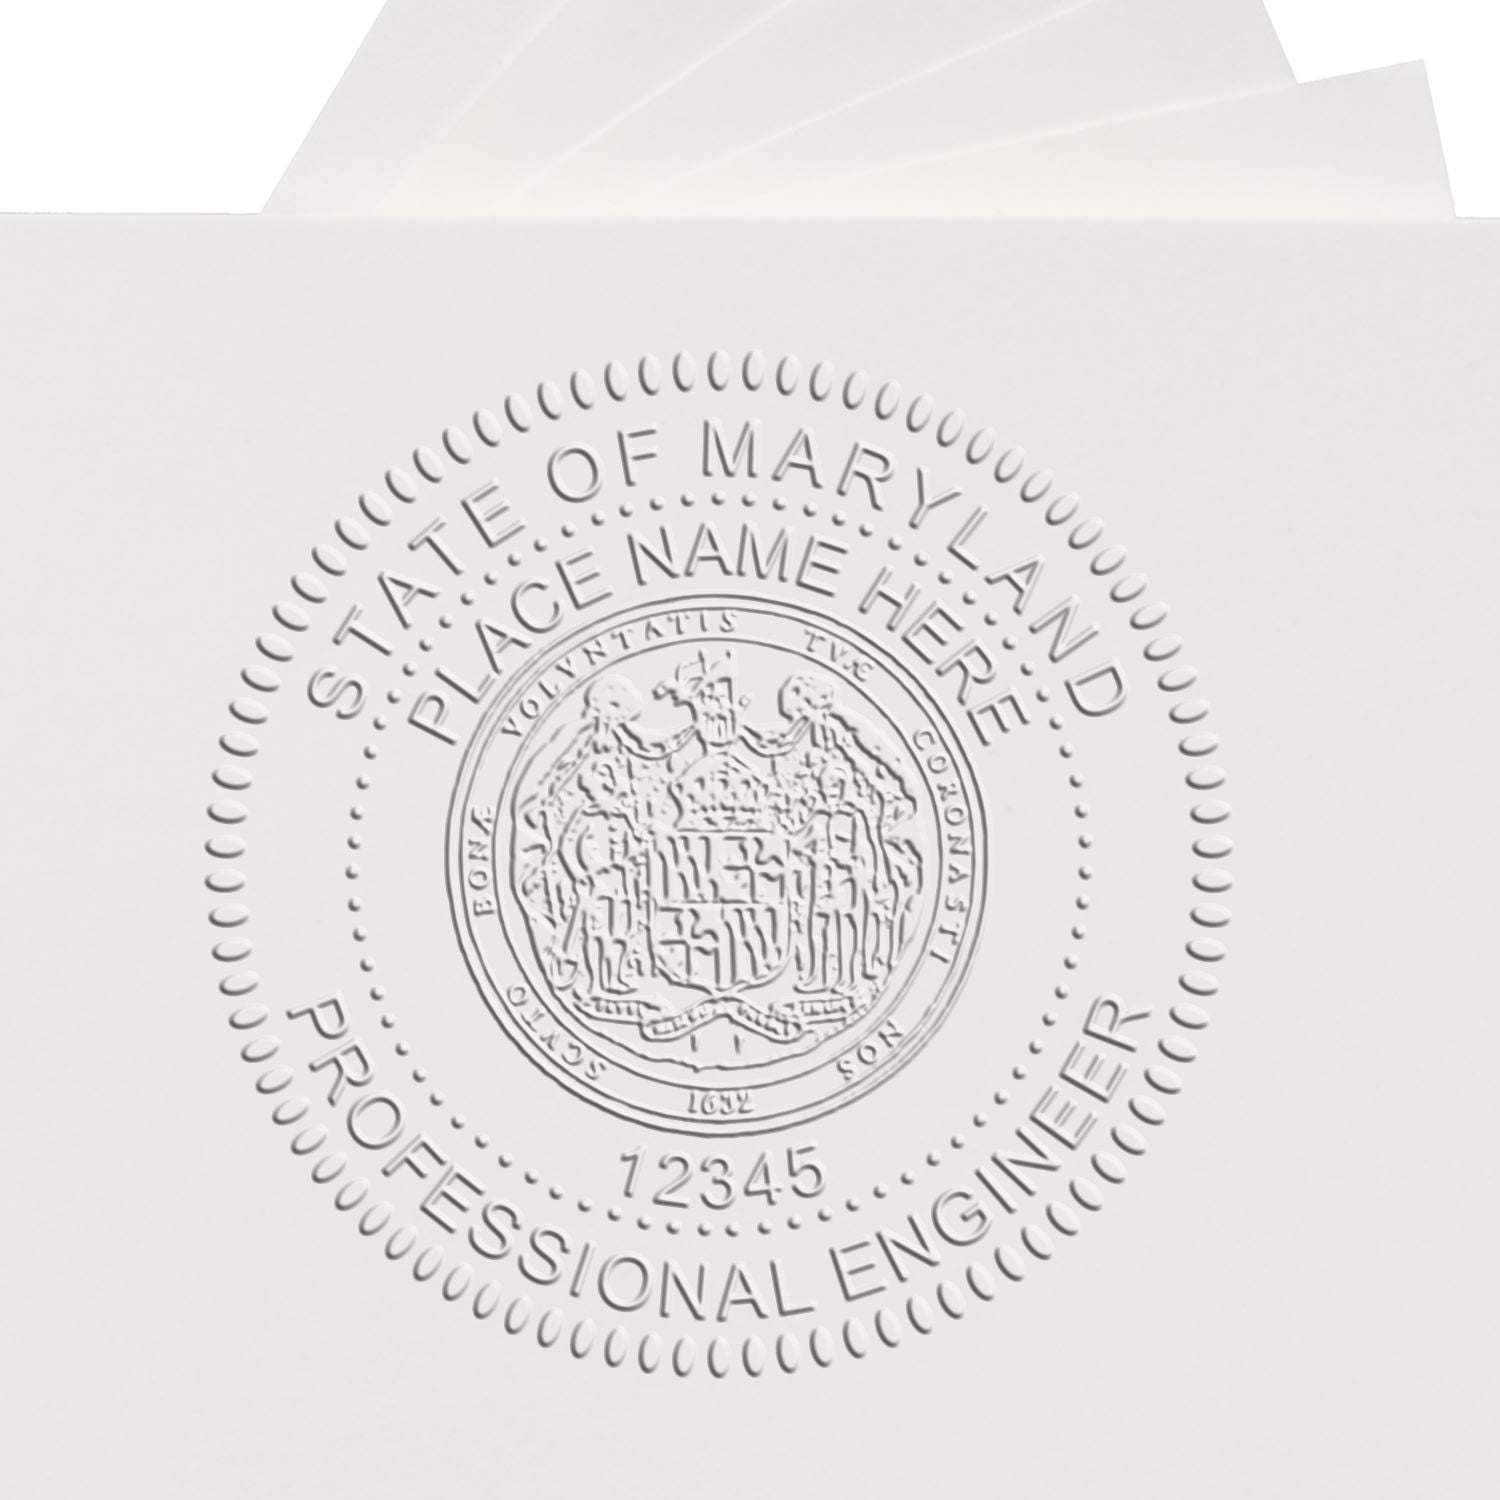 A photograph of the Soft Maryland Professional Engineer Seal stamp impression reveals a vivid, professional image of the on paper.